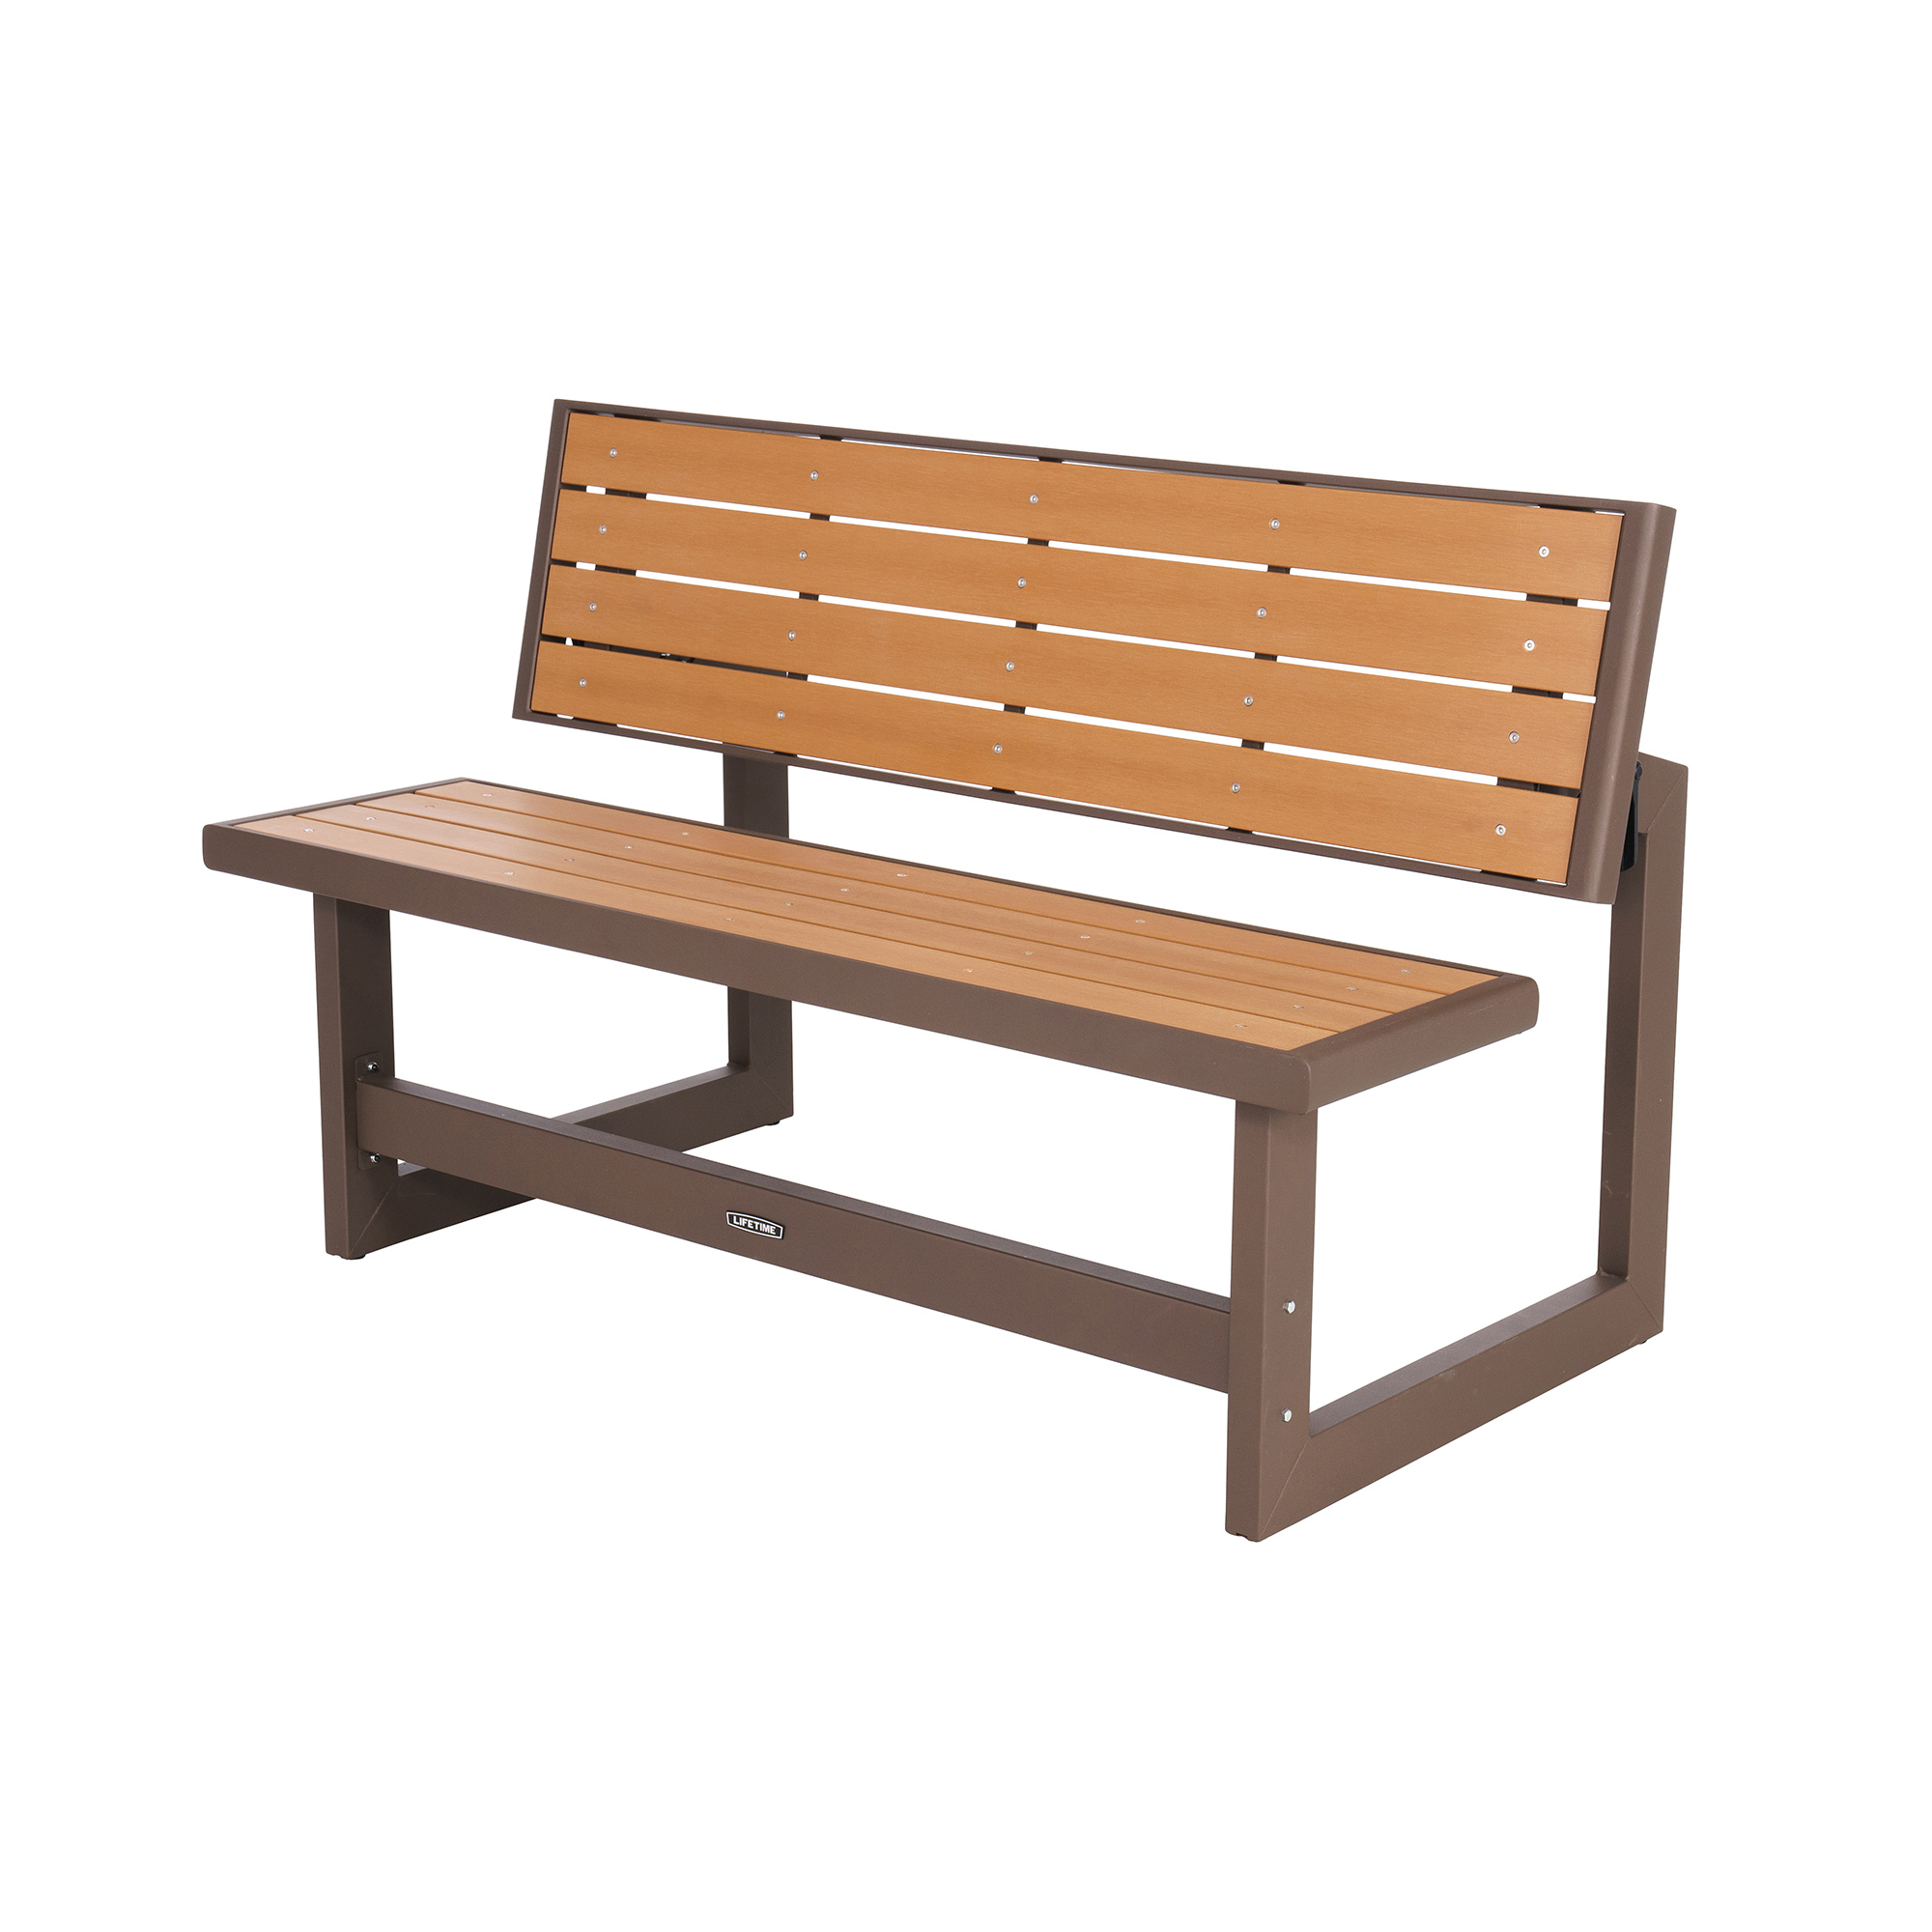 Lifetime Outdoor Convertible Bench, Brown - image 1 of 10